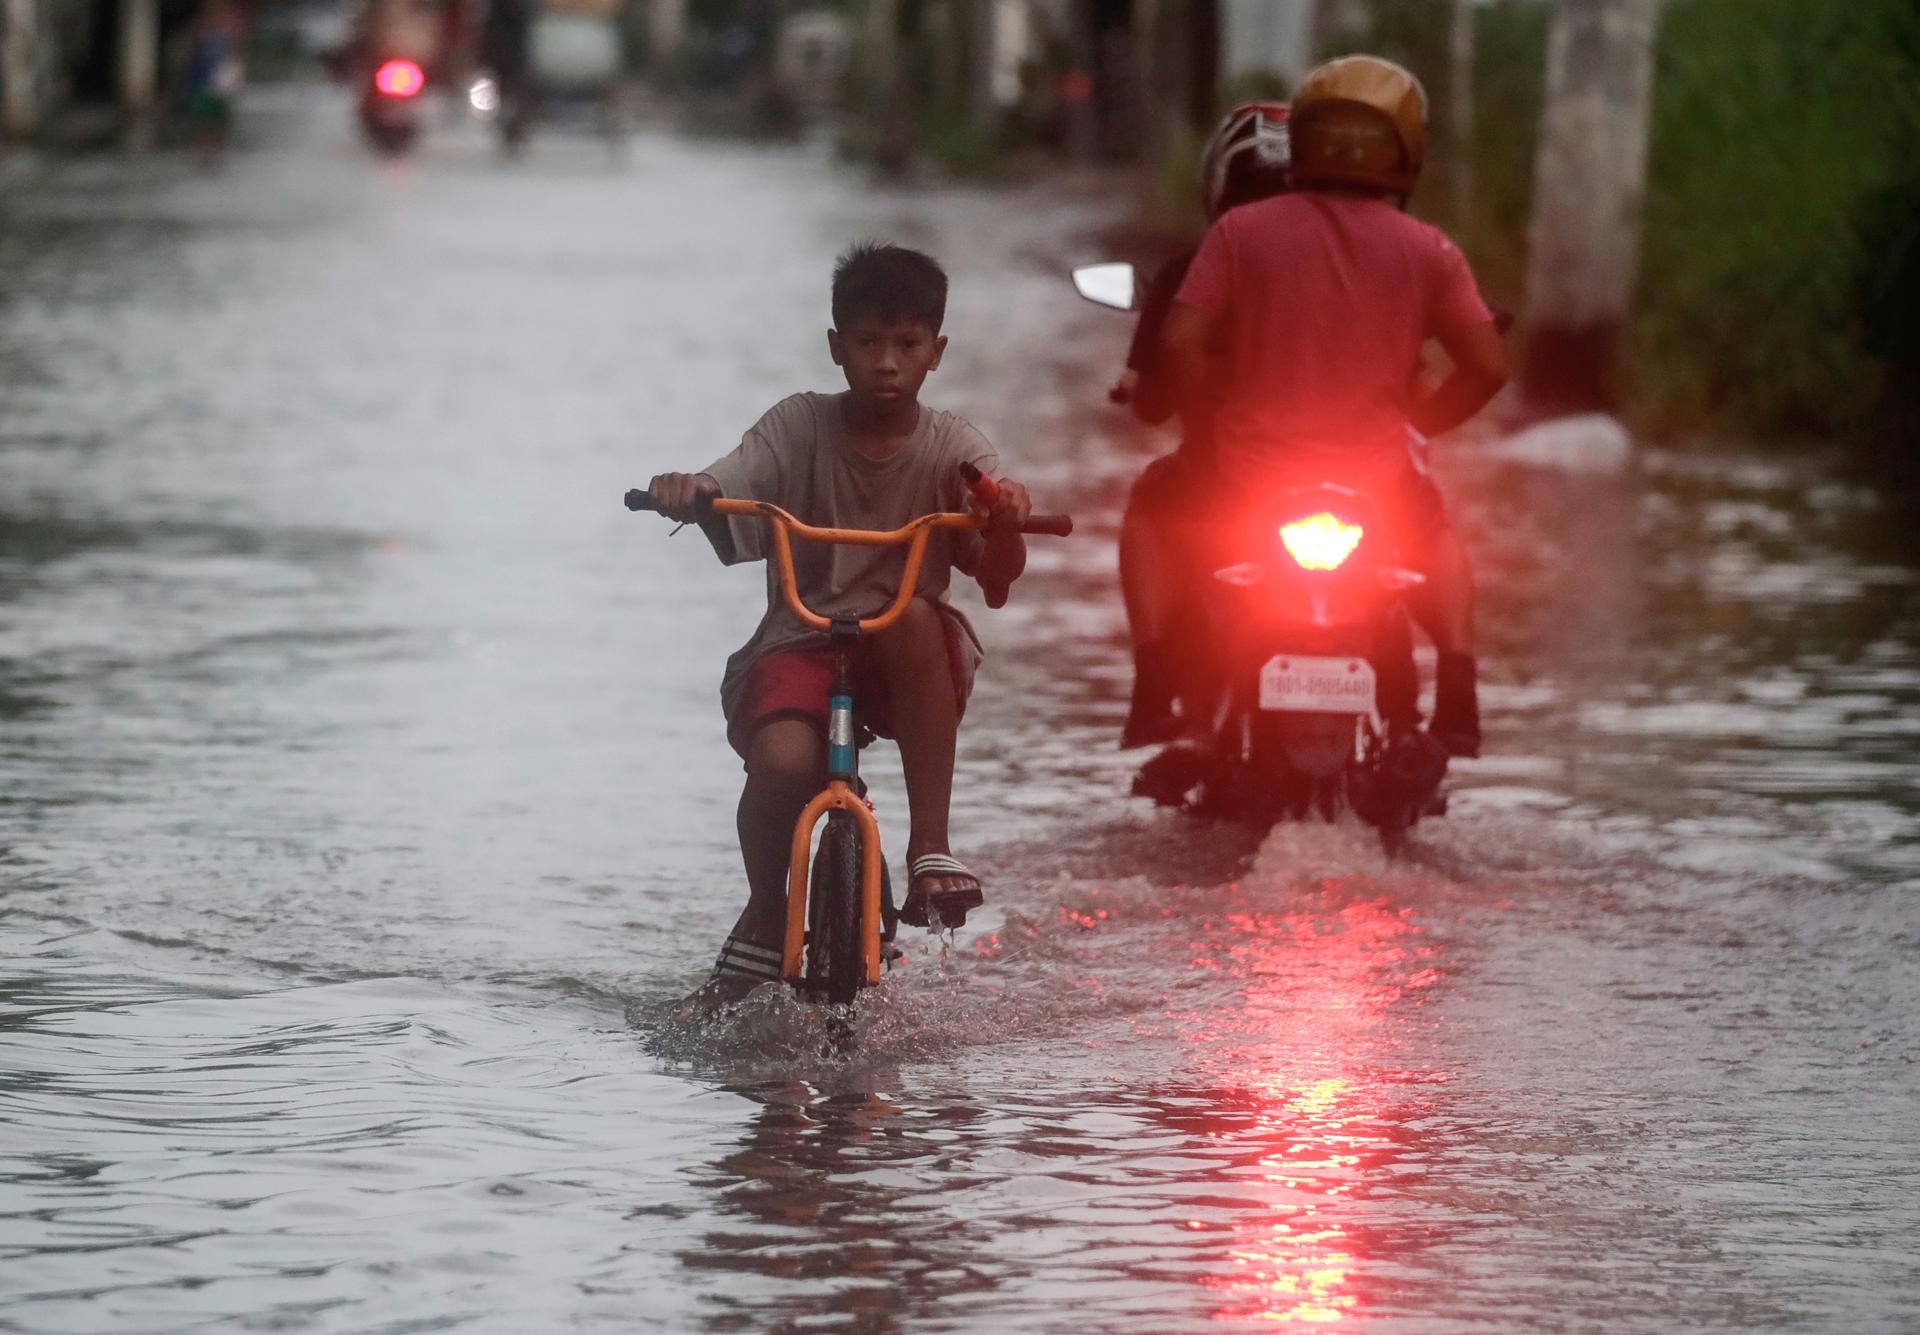 A Filipino boy rides a bicycle amidst a street partially submerged by the floodwater in Malabon city, Metro Manila, Philippines, 26 July 2023. EFE-EPA/FRANCIS R. MALASIG
